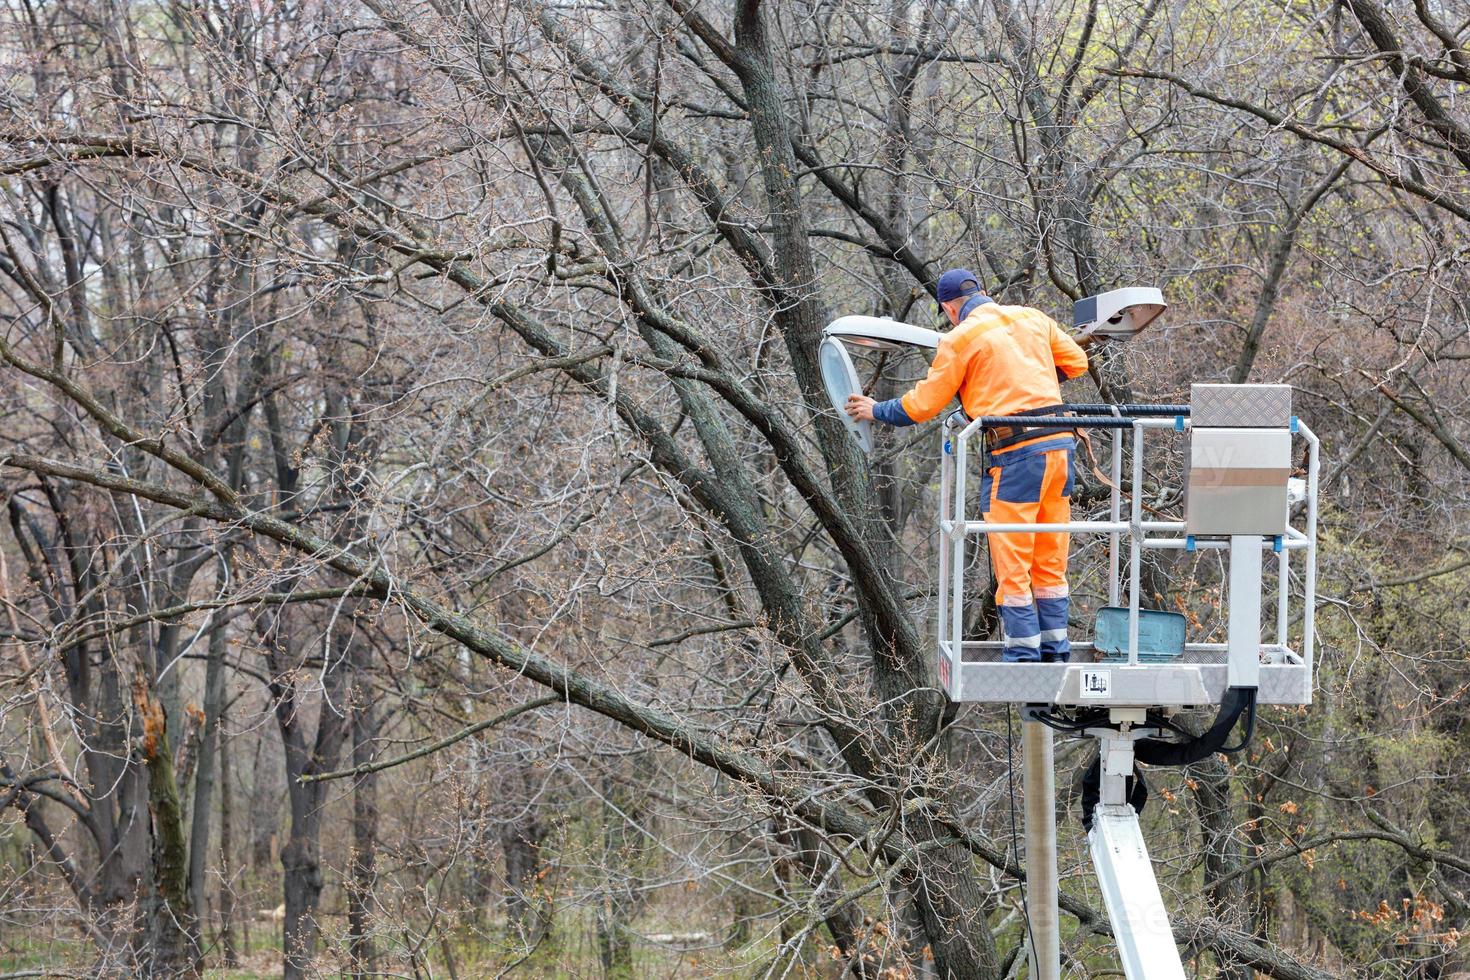 A utility worker changes a light bulb on a street lighting pole against the backdrop of the park's trees. photo